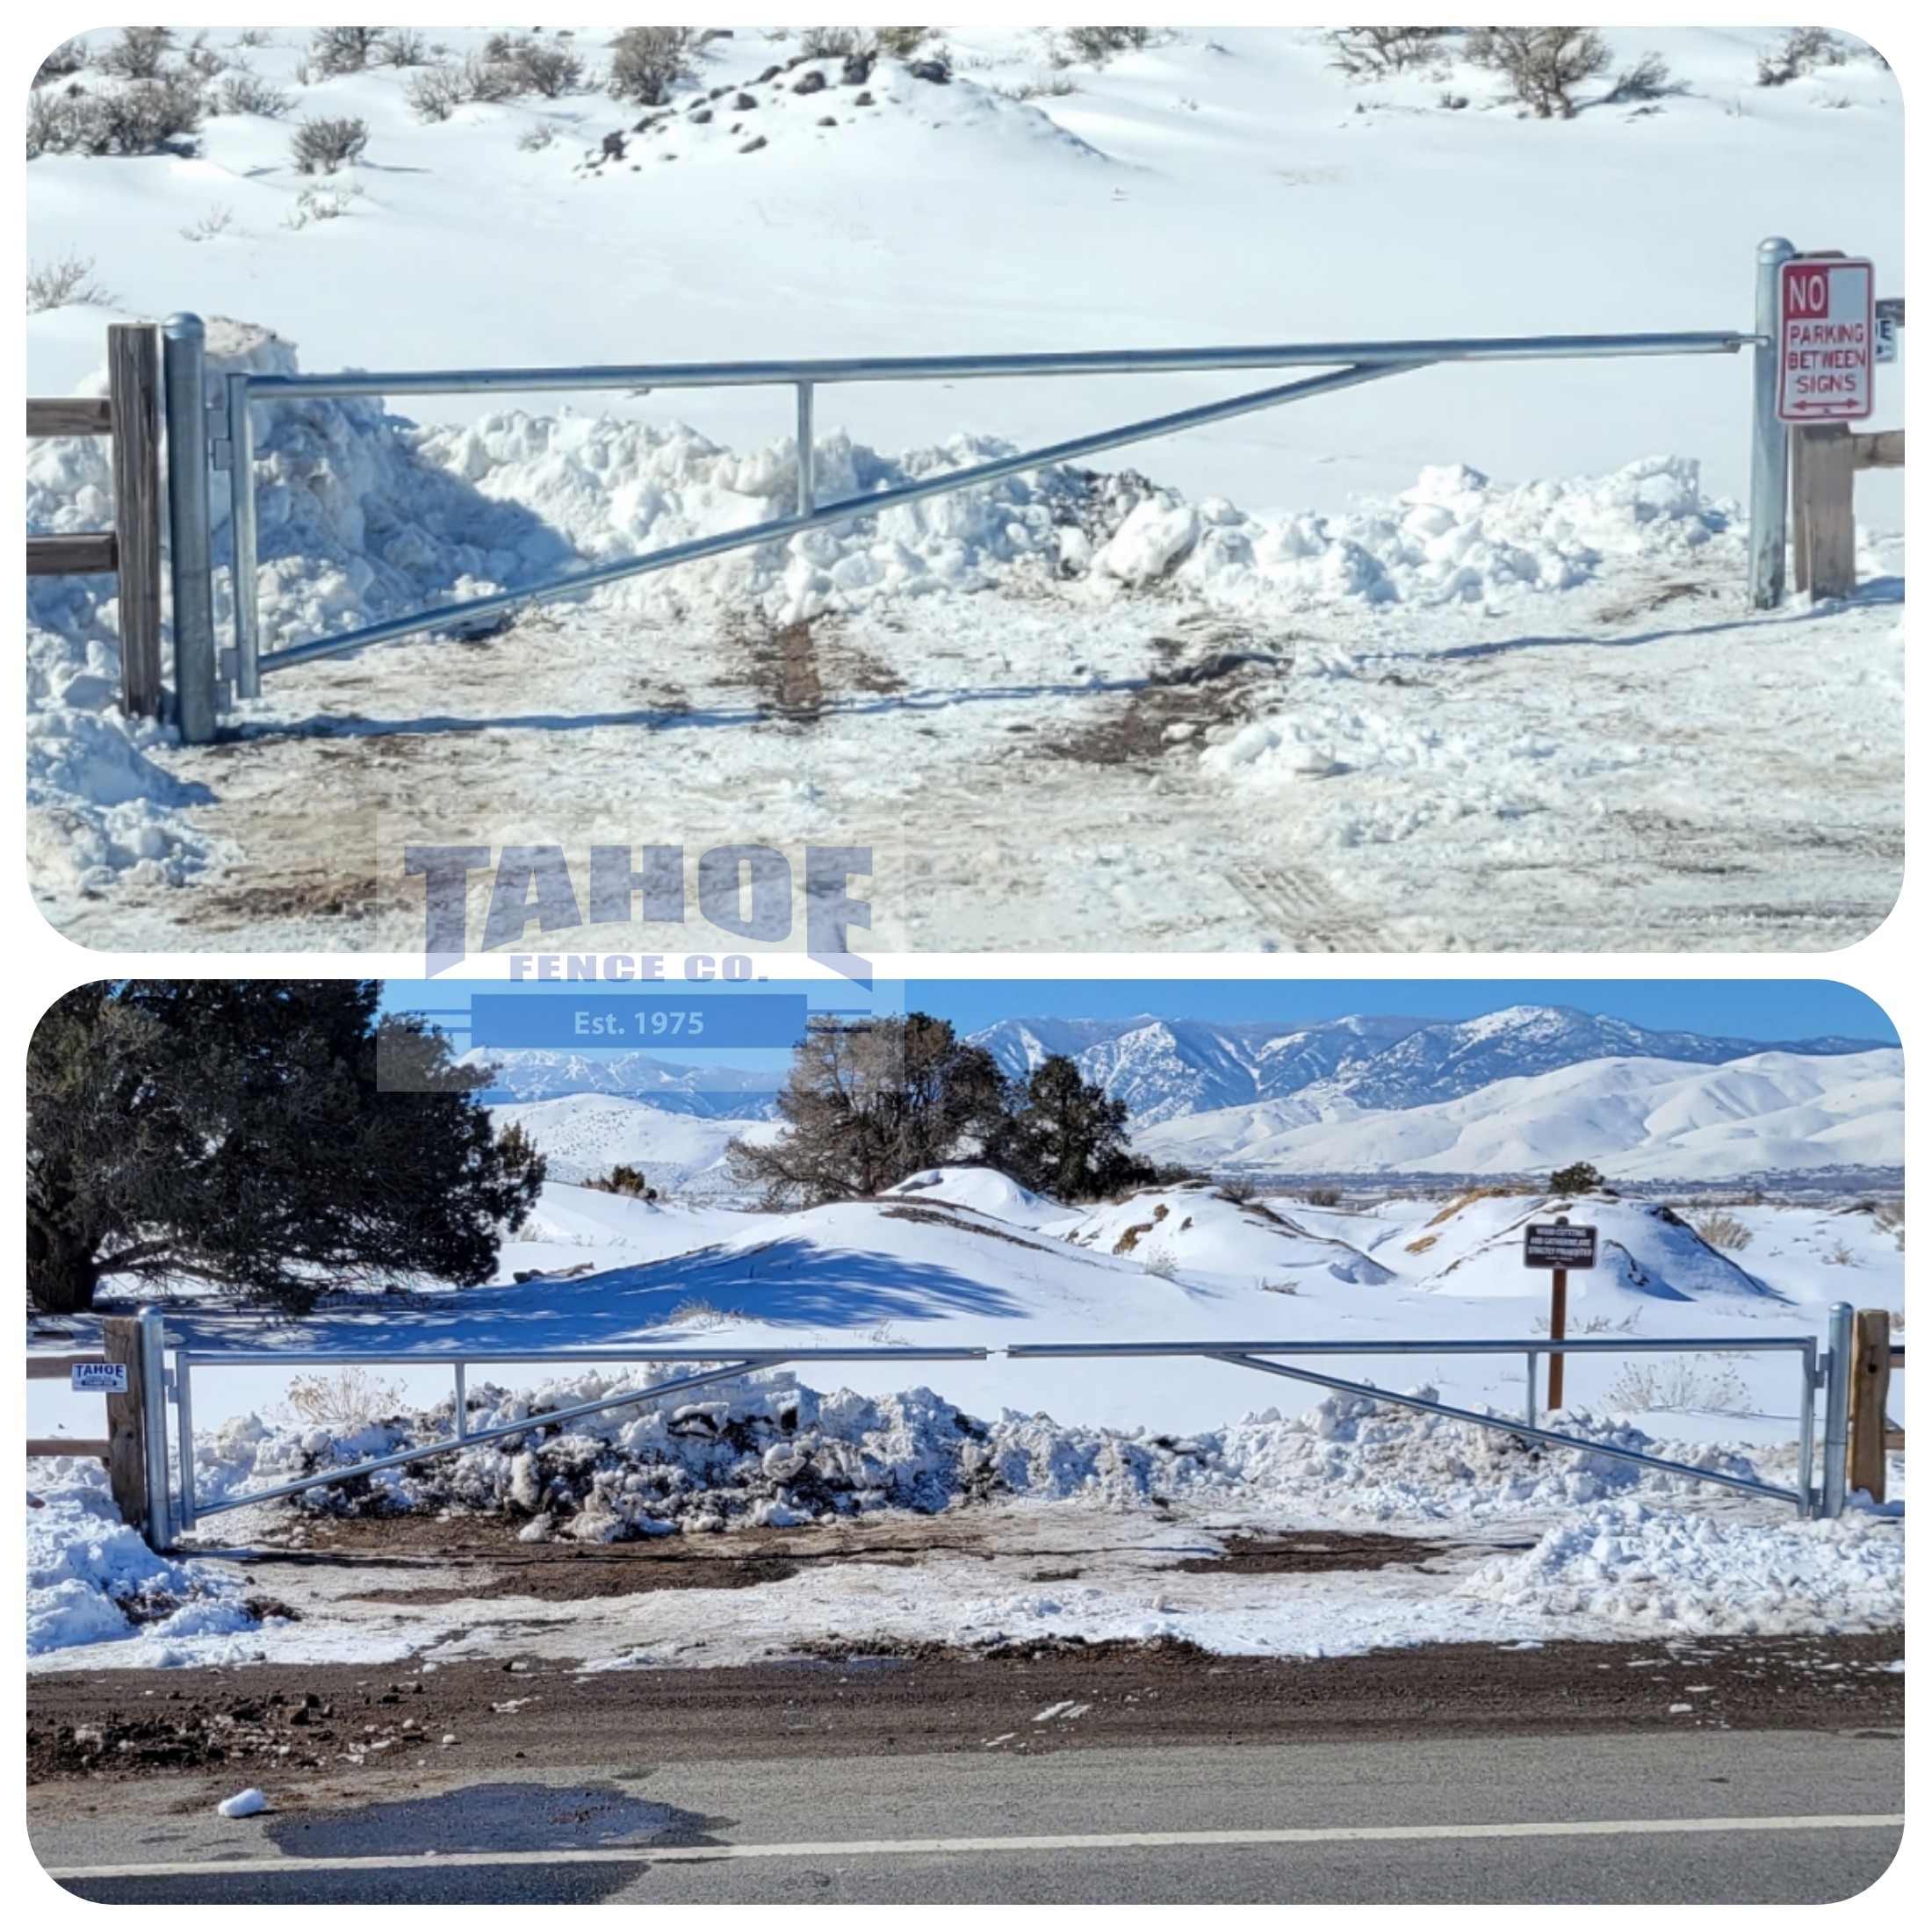 Keeping It Beautiful

We may be biased as locals, but our area is pretty with a little bit of snow (emphasis on a little at this moment!)

And to help keep it beautiful, Tahoe installed some pipe, barrier gates near the Carson City Disk Golf Course to keep out unauthorized vehicles.

Pictured: Galvanized pipe barrier arm gates in Carson City. One 14' wide, single swing gate and one set of 25' wide, double swing gates with ball bearing hinges.